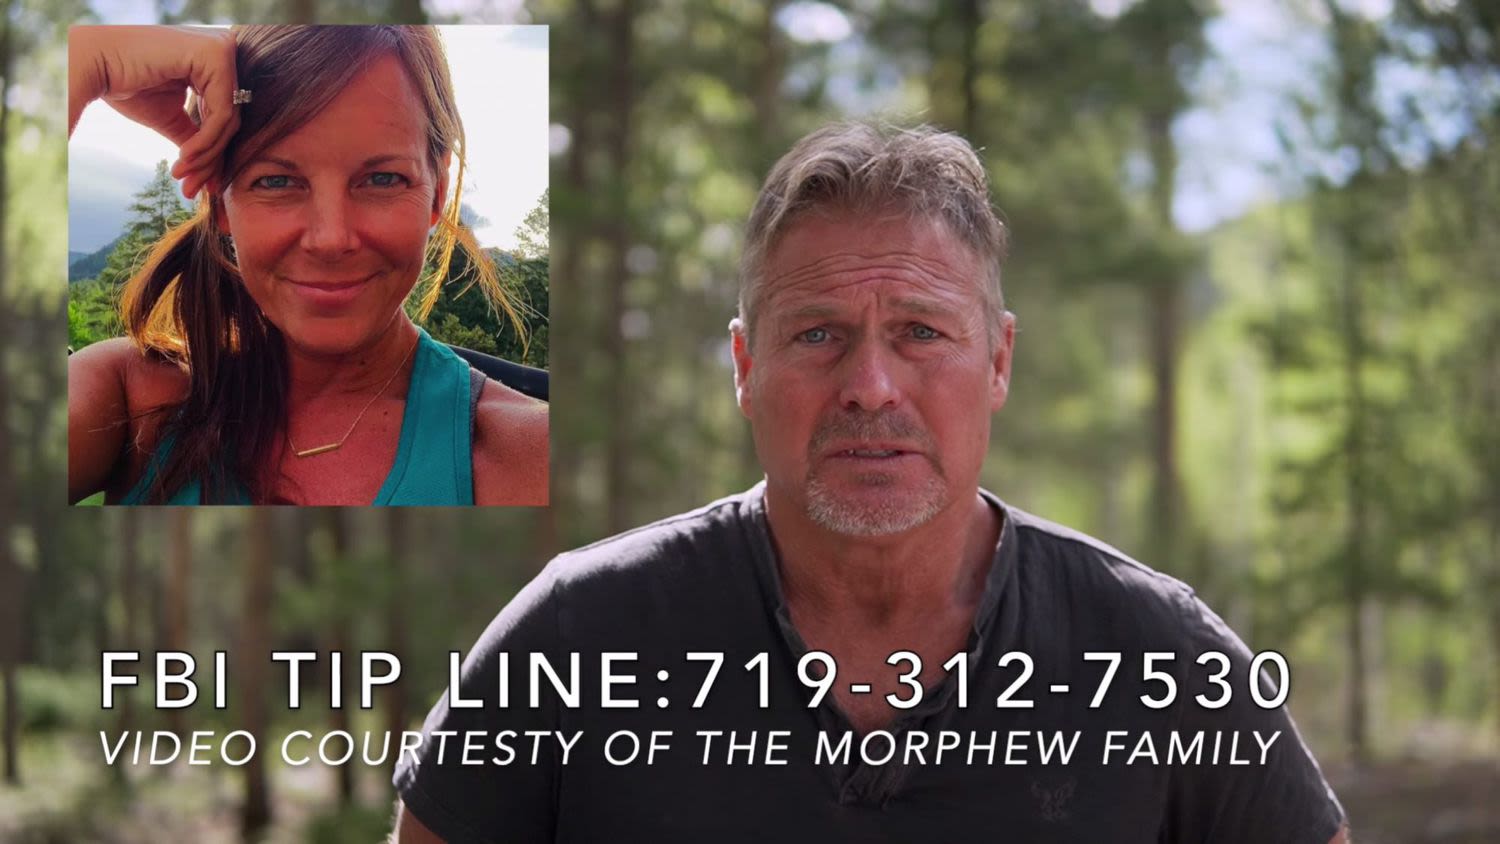 Suzanne Morphew Vanished on Mother's Day in 2020: Inside the Twists and Turns of Homicide Case